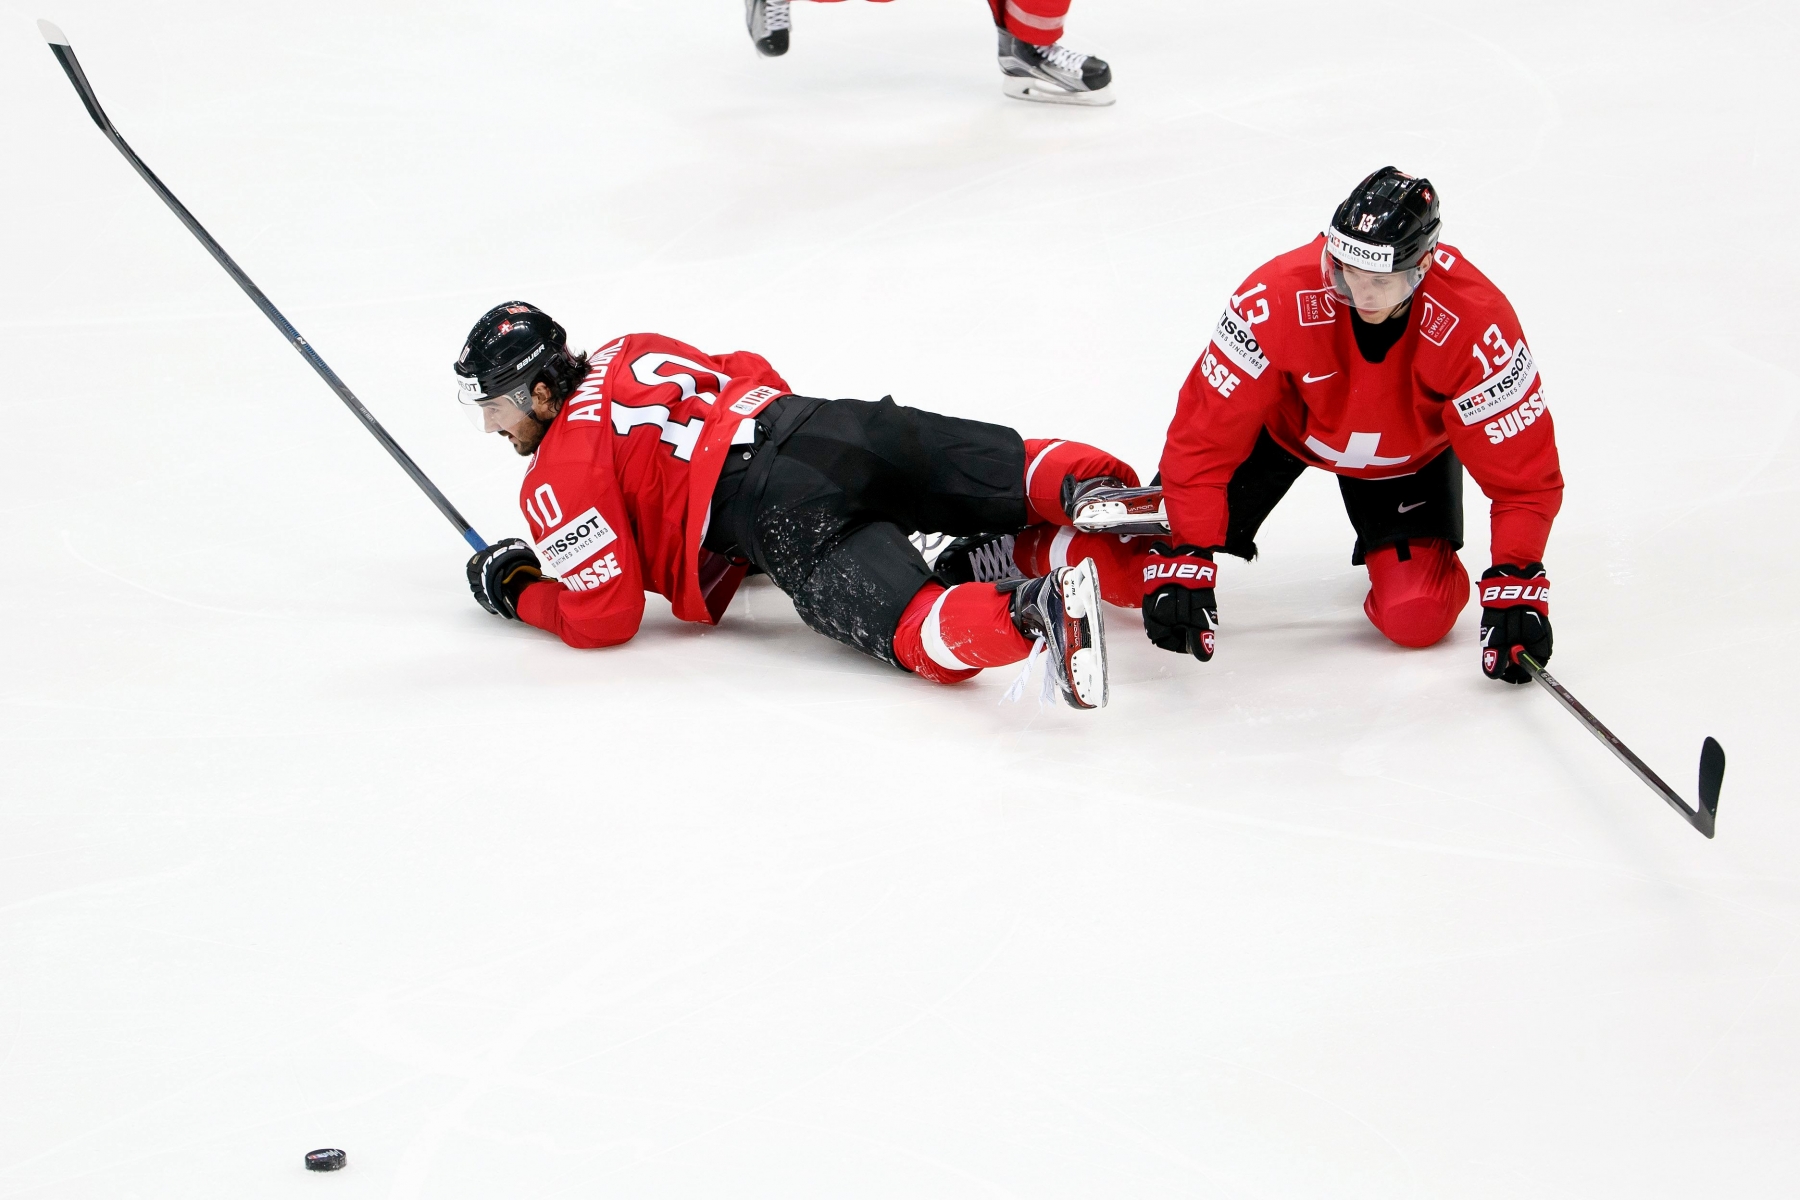 Switzerland's players Andres Ambuehl, left, and Felicien Du Bois, collide, right, during the IIHF 2016 World Championship preliminary round game between Switzerland and Kazakhstan, at the Ice Palace, in Moscow, Russia, Saturday, May 7, 2016. (KEYSTONE/Salvatore Di Nolfi) EISHOCKEY WM 2016 CHE KAZ